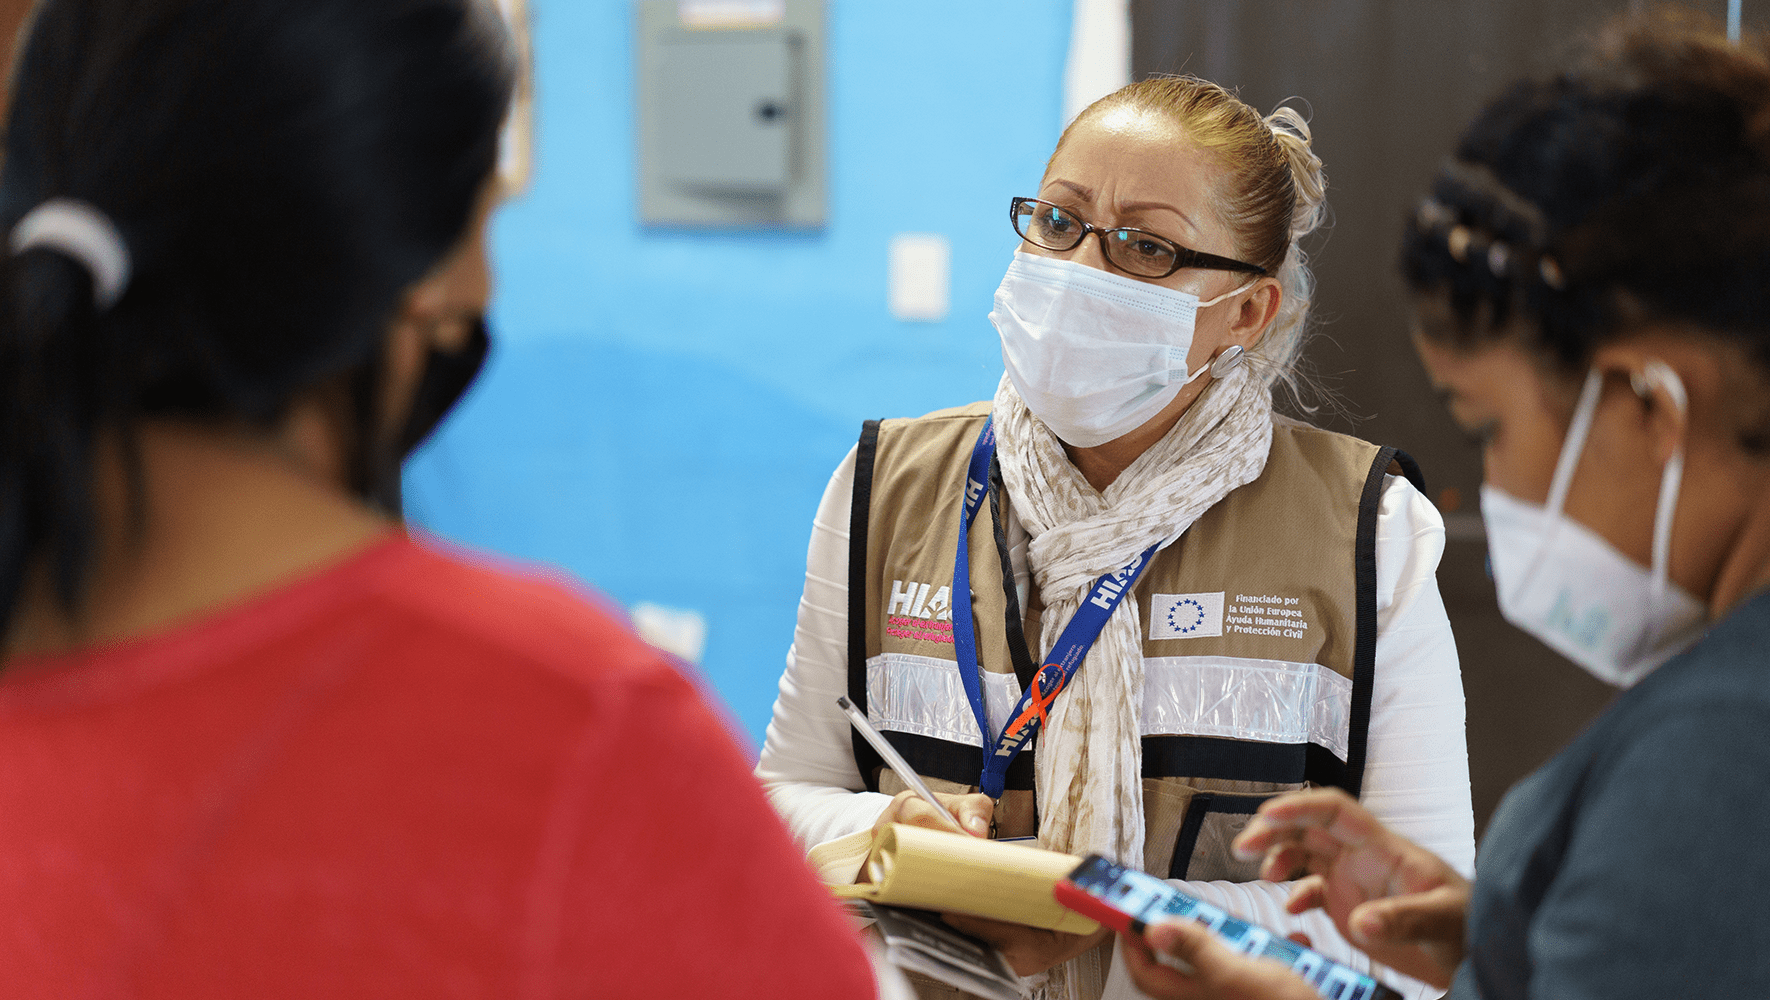 Social worker Carolina Hernandez gathers contact information of women who attended a workshop at Pan de Vida Migrant Shelter in Ciudad Juárez, Mexico. December 9, 2021. (Paul Ratje for HIAS)